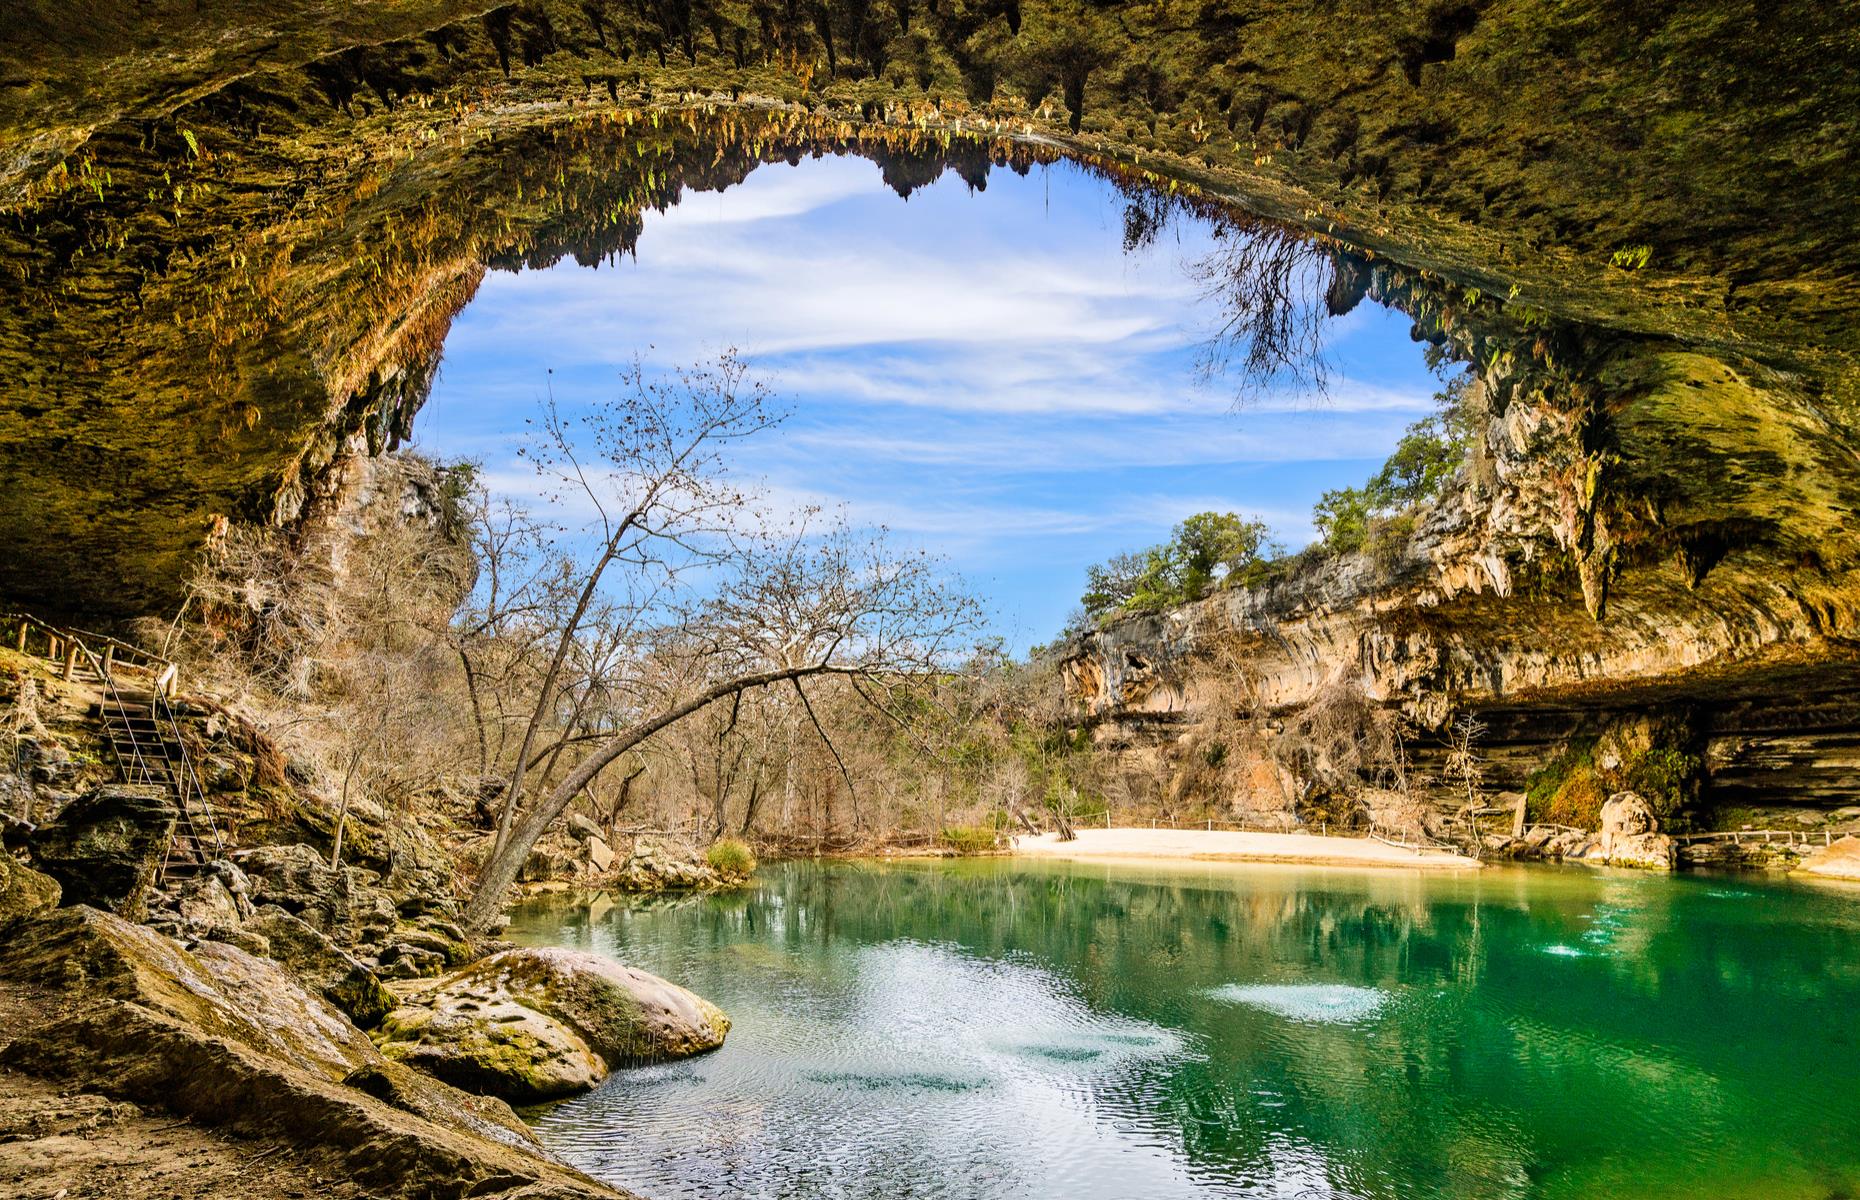 <p>This natural swimming hole wouldn't look out of place in the Mediterranean – in fact it's just over 20 miles (32km) west of Austin. A 50-foot (15m) waterfall feeds the green pool, which was once entirely underground, before the sheltering limestone roof above it collapsed. The pool is usually a popular spot for a dip in the summer months and normally you'll need a reservation to access it, although <a href="https://parks.traviscountytx.gov/parks/hamilton-pool-preserve">the site is currently closed</a> due to COVID-19. </p>